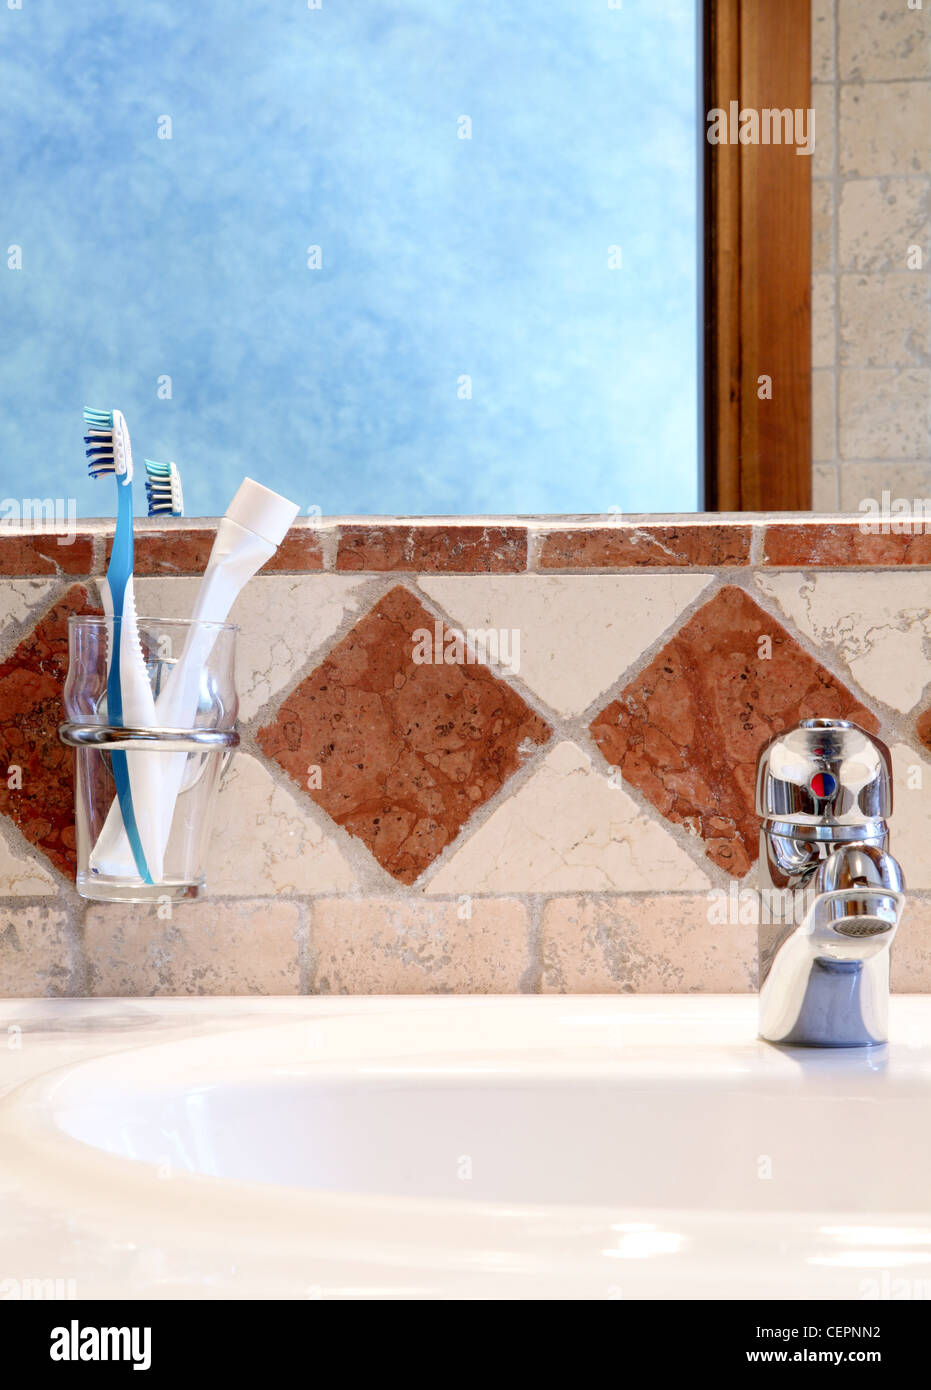 Bathroom: mirror, sink, water tap, toothbrushes Stock Photo